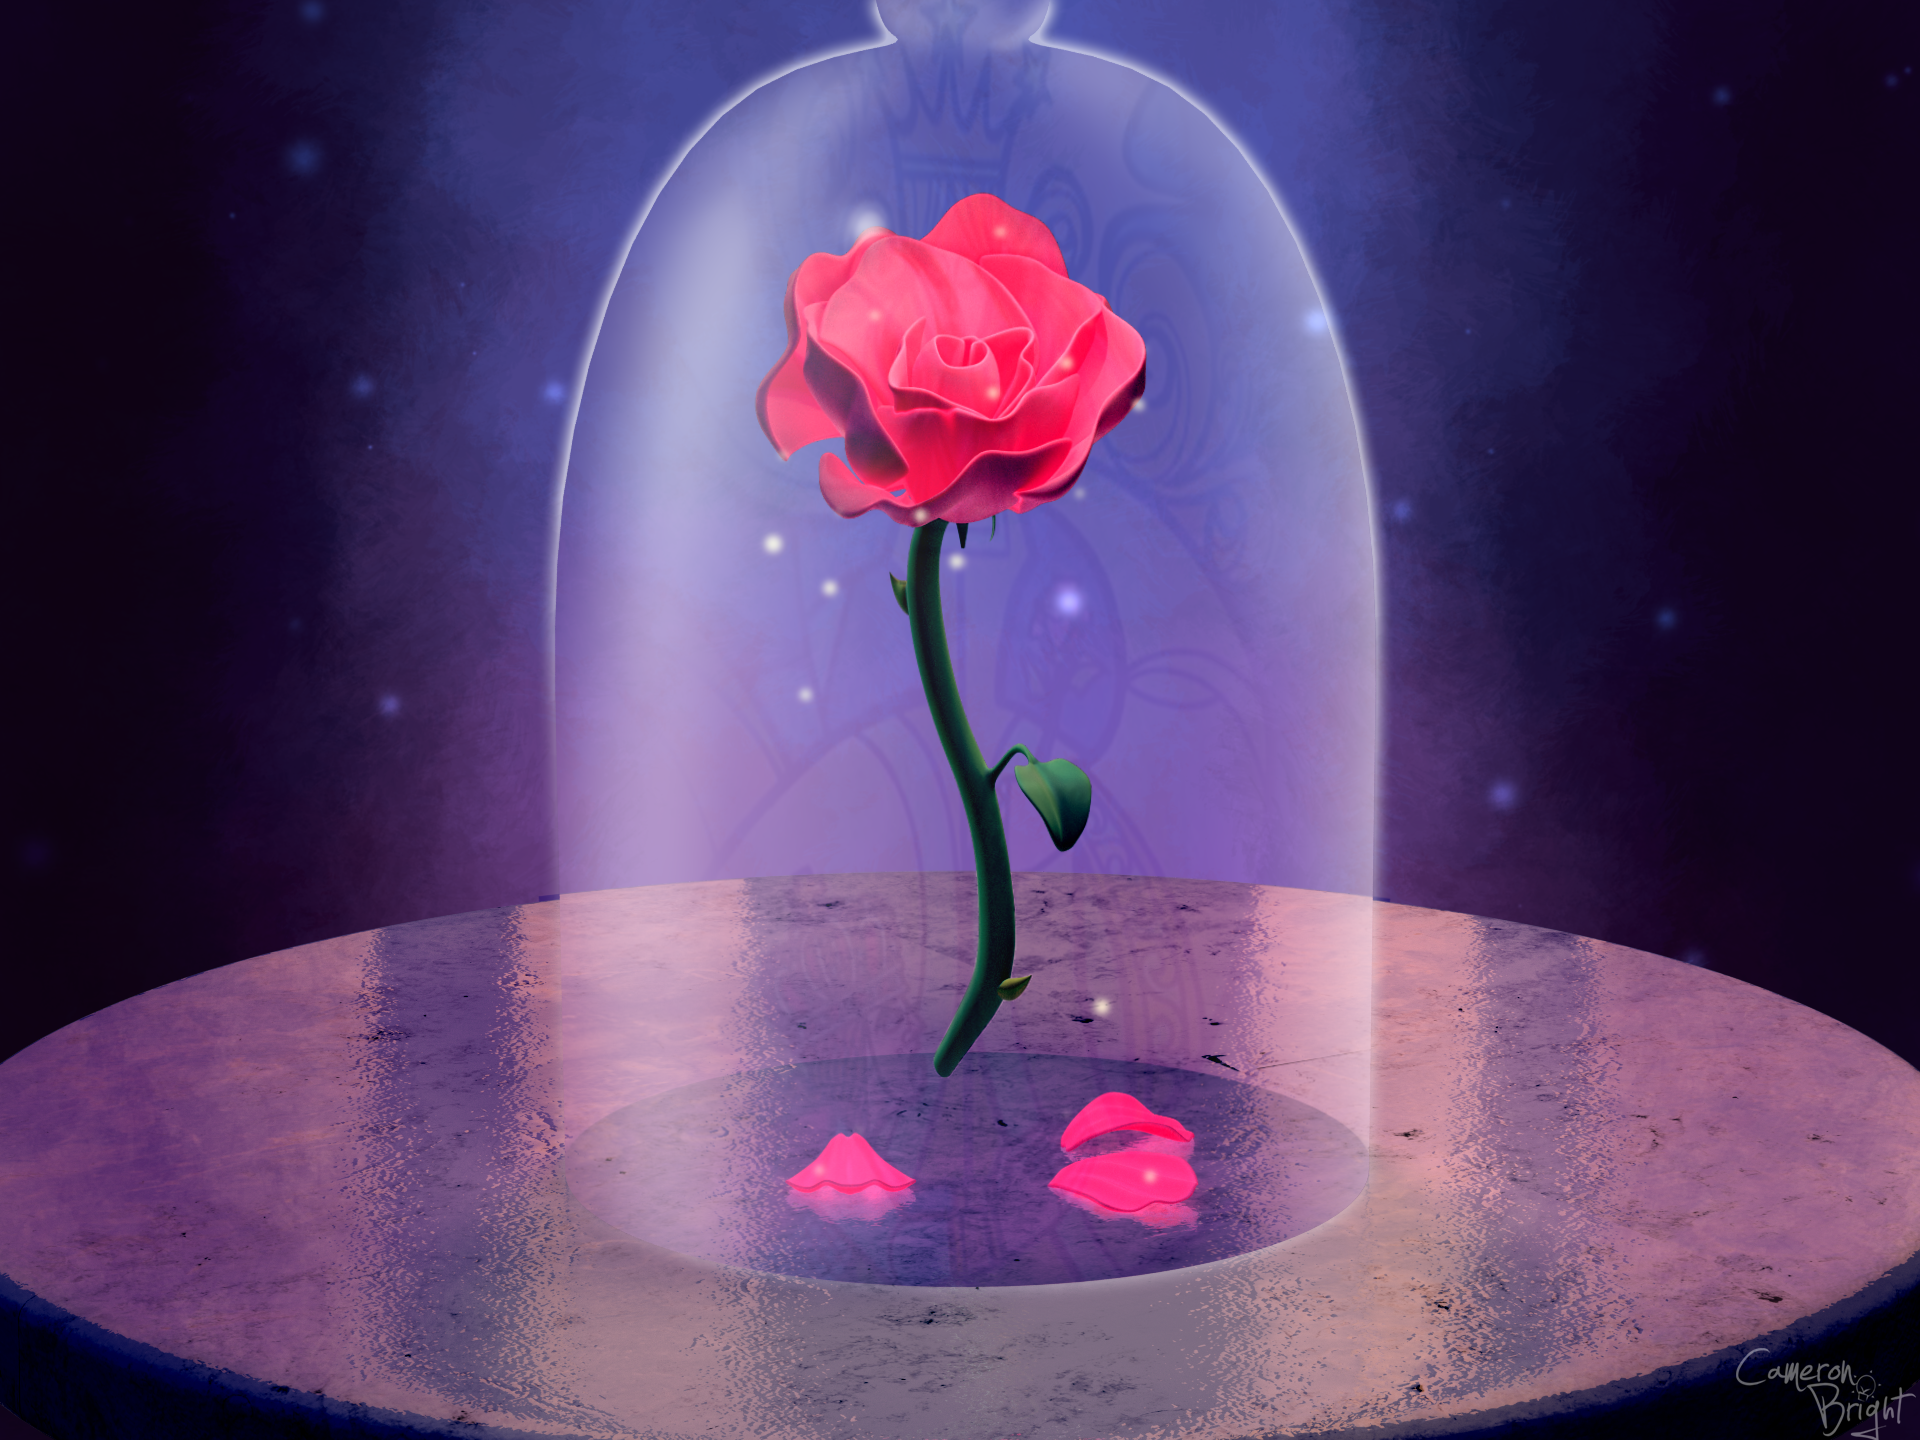 Pink Rose from "Beauty and the Beast" by Cameron Bright